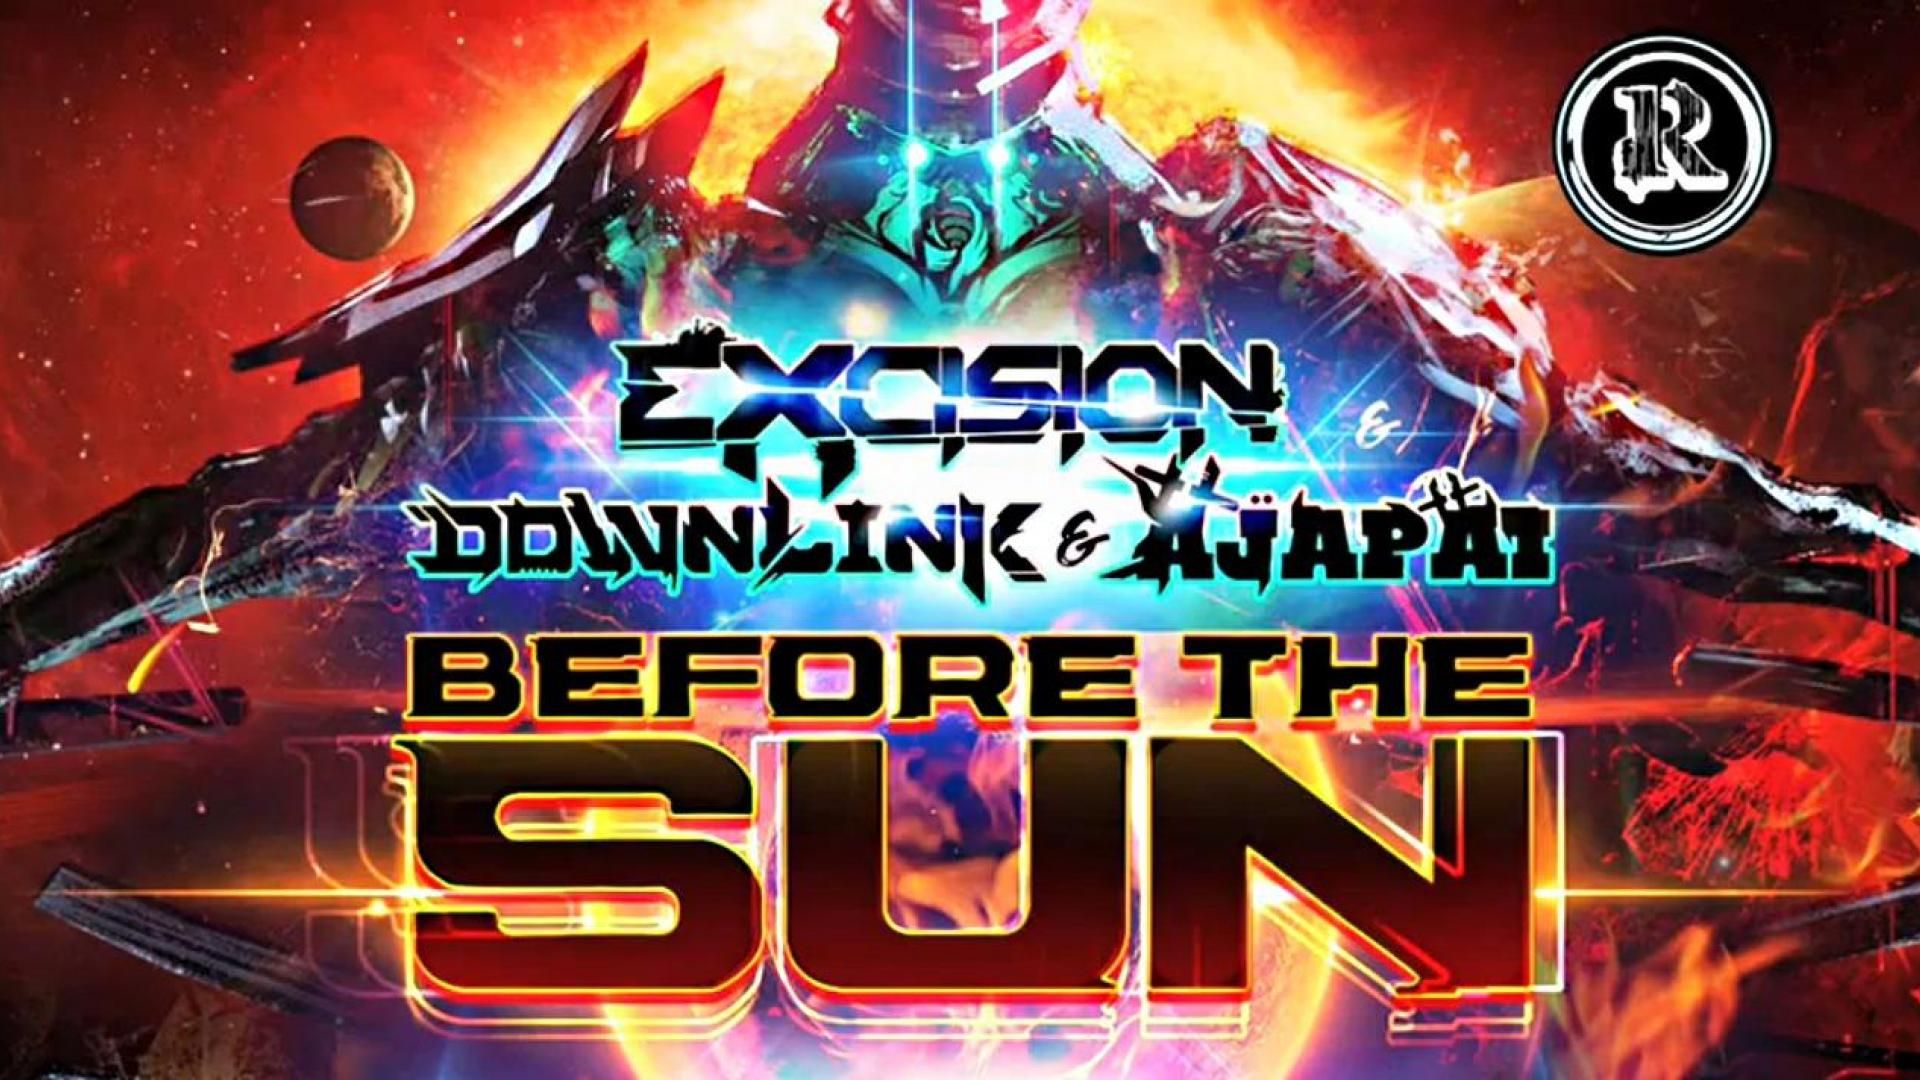 Free download Excision Wallpaper HD [1920x1080] for your Desktop